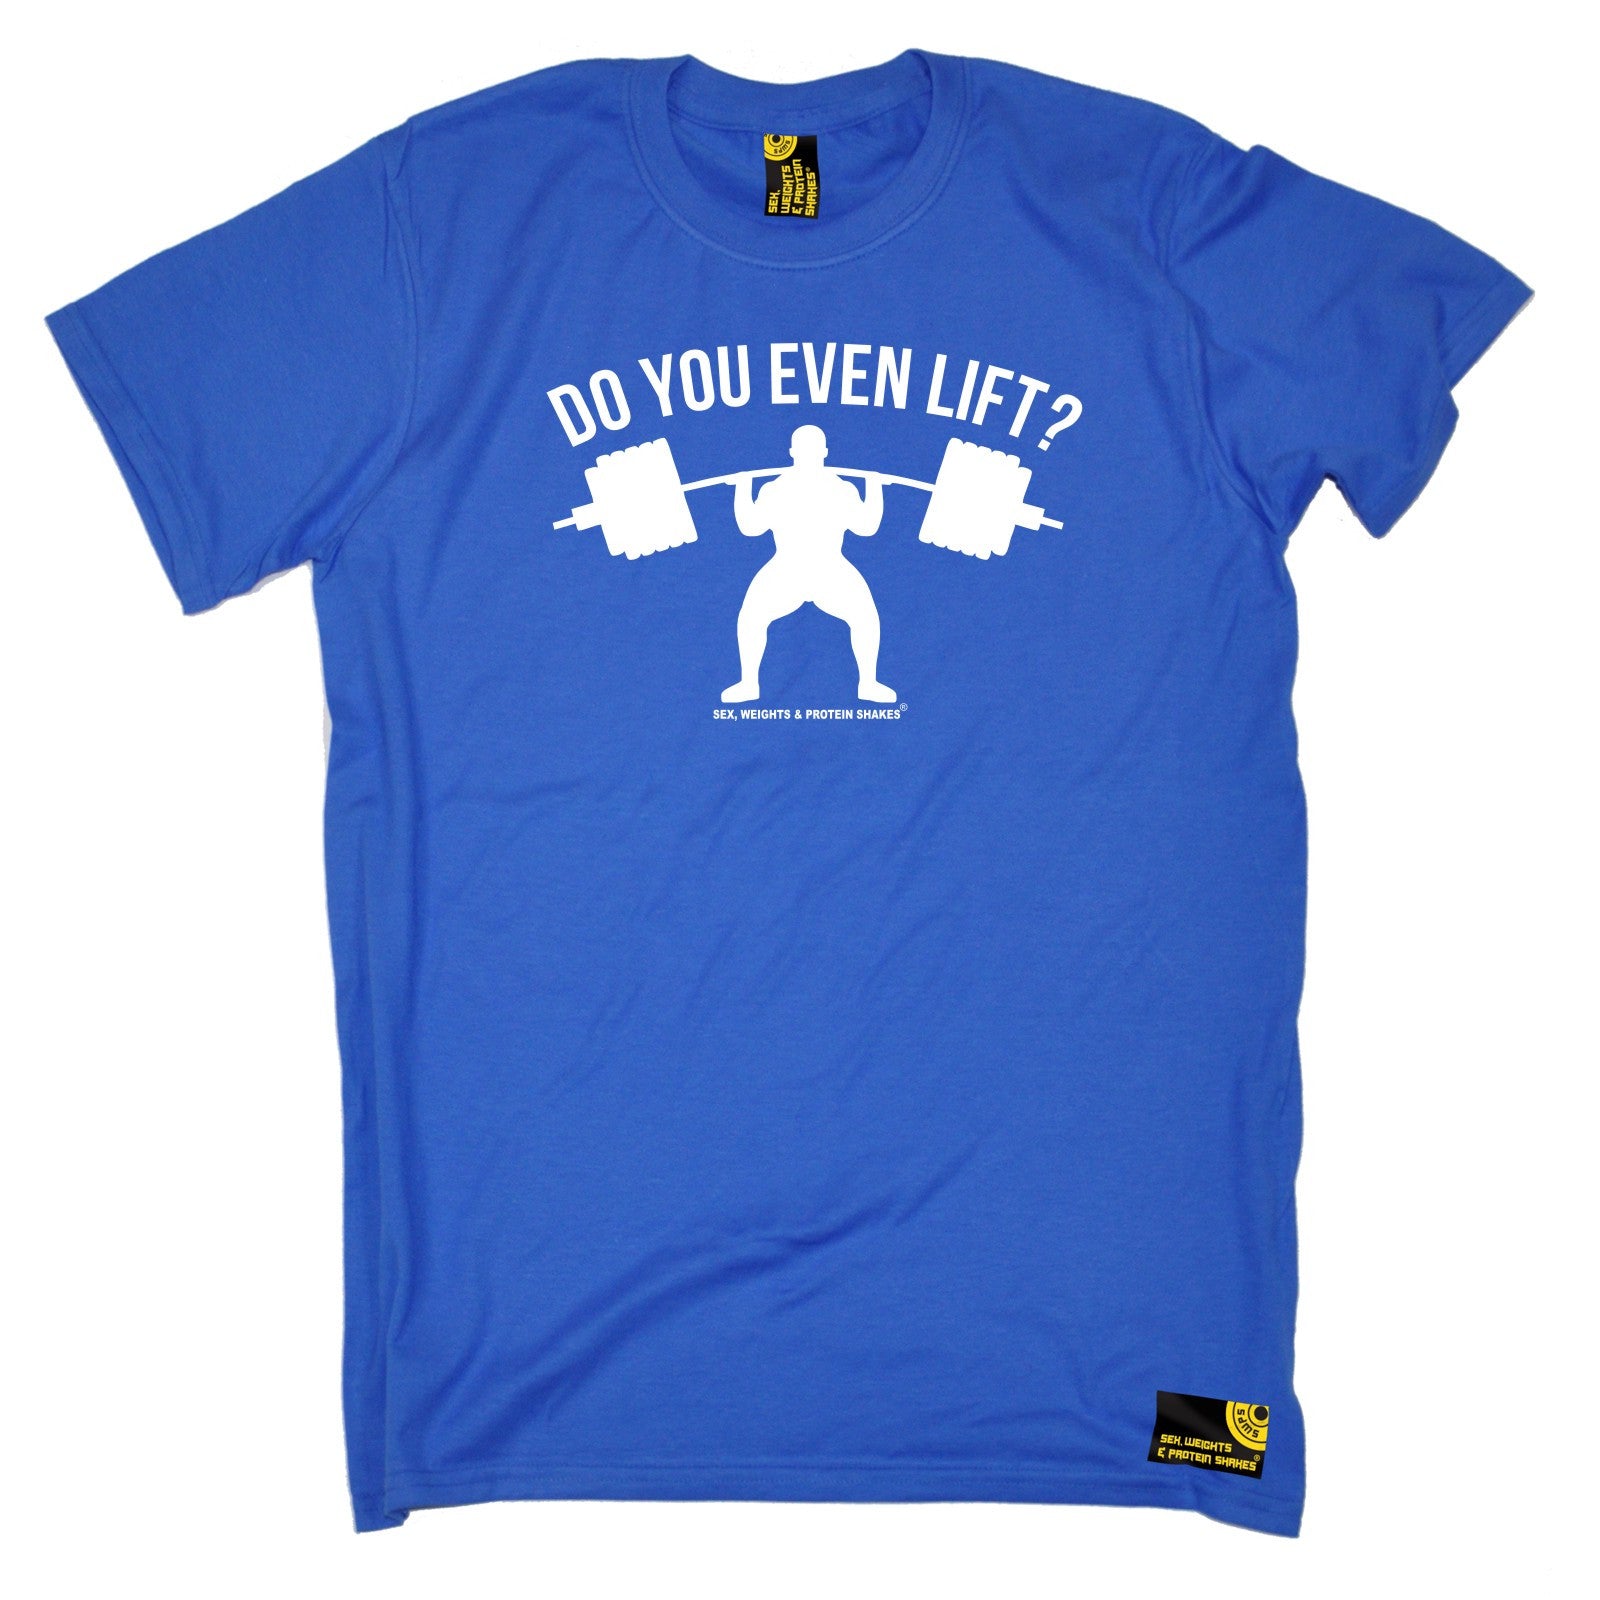 Do You Even Lift MENS SWPS T-SHIRT birthday gift workout gym training fitness eBay image